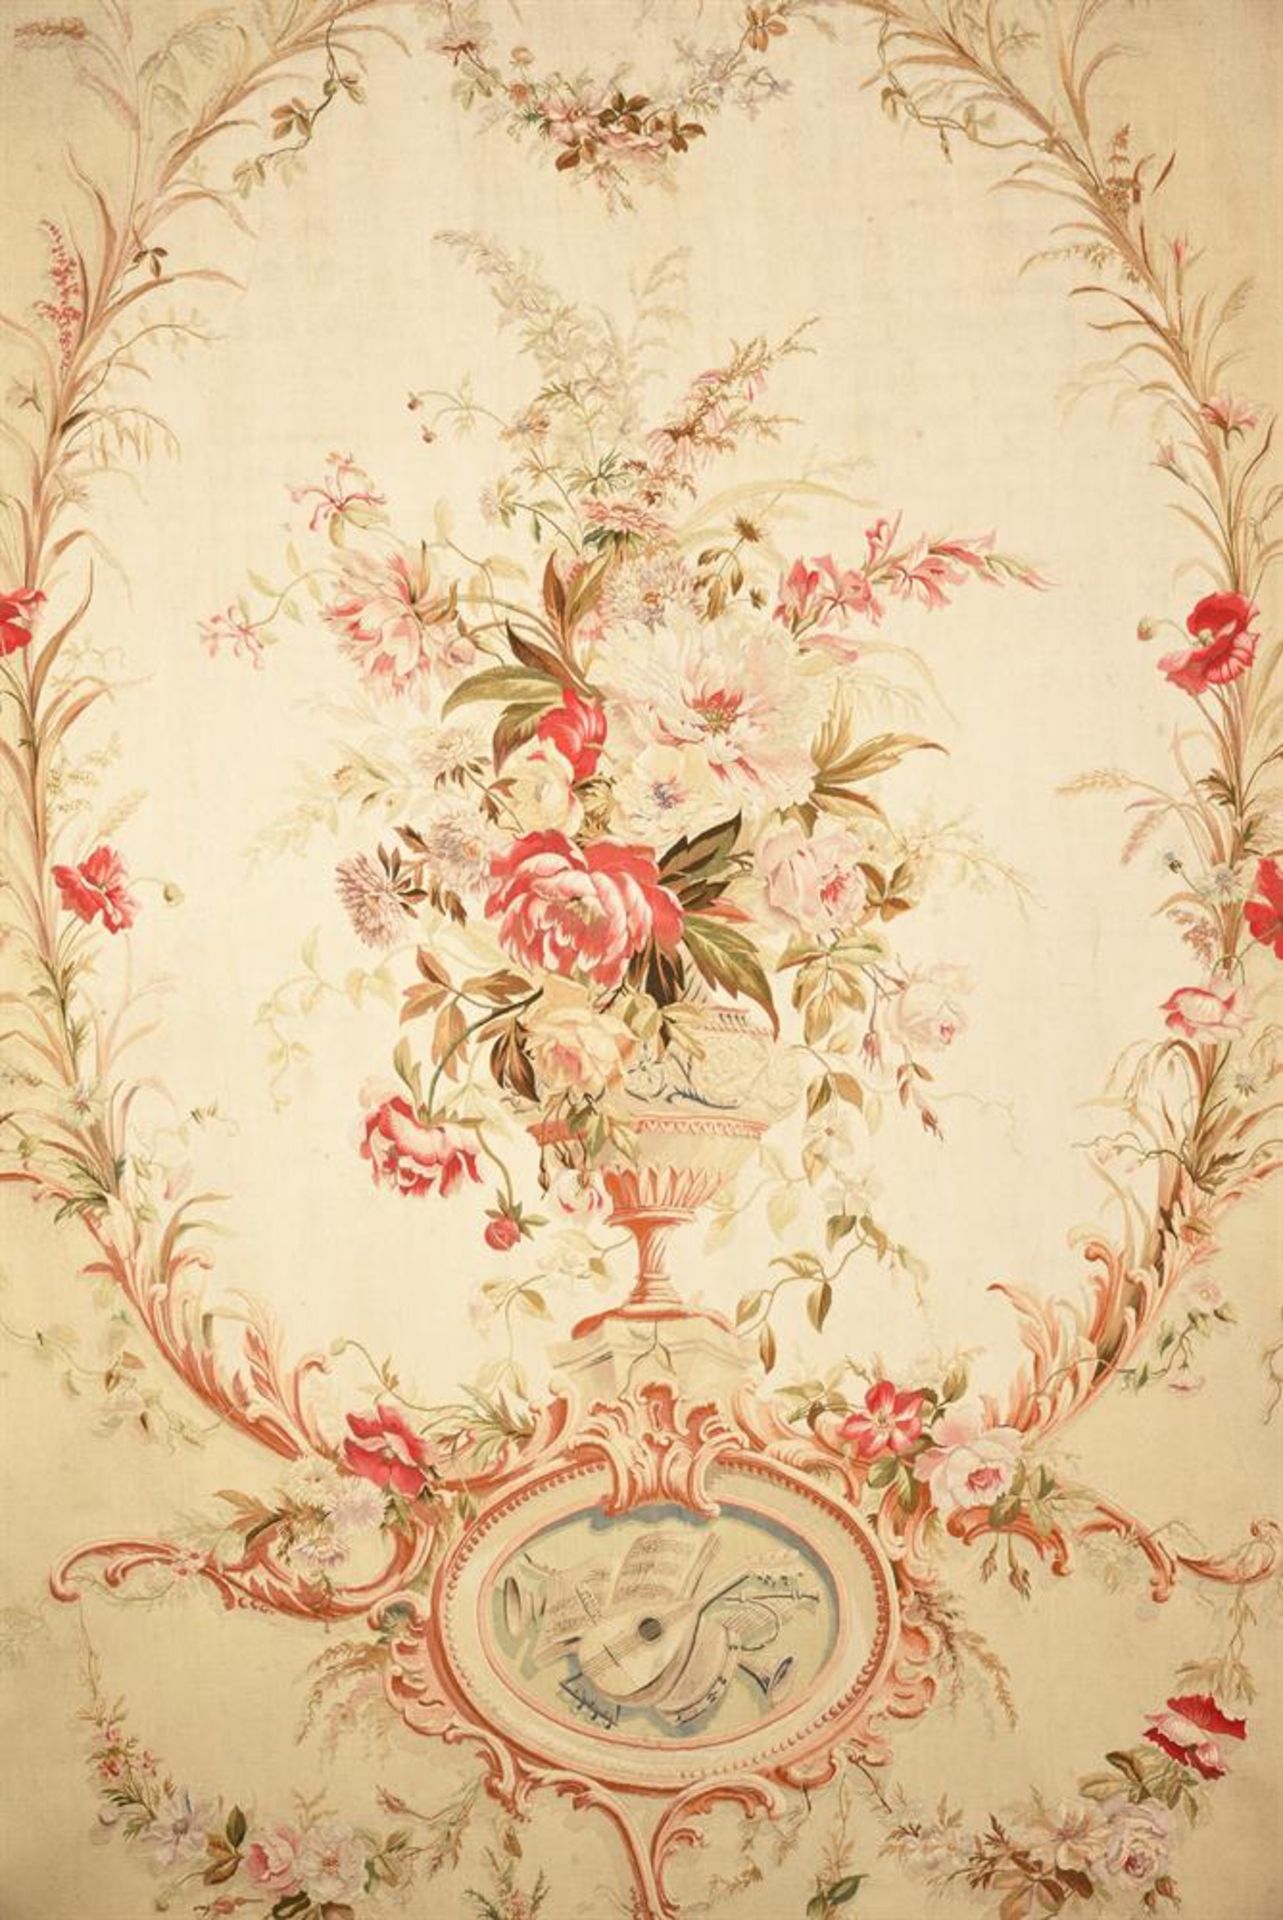 A PAIR OF AUBUSSON TAPESTRY PANELS, 19TH CENTURY - Image 2 of 6